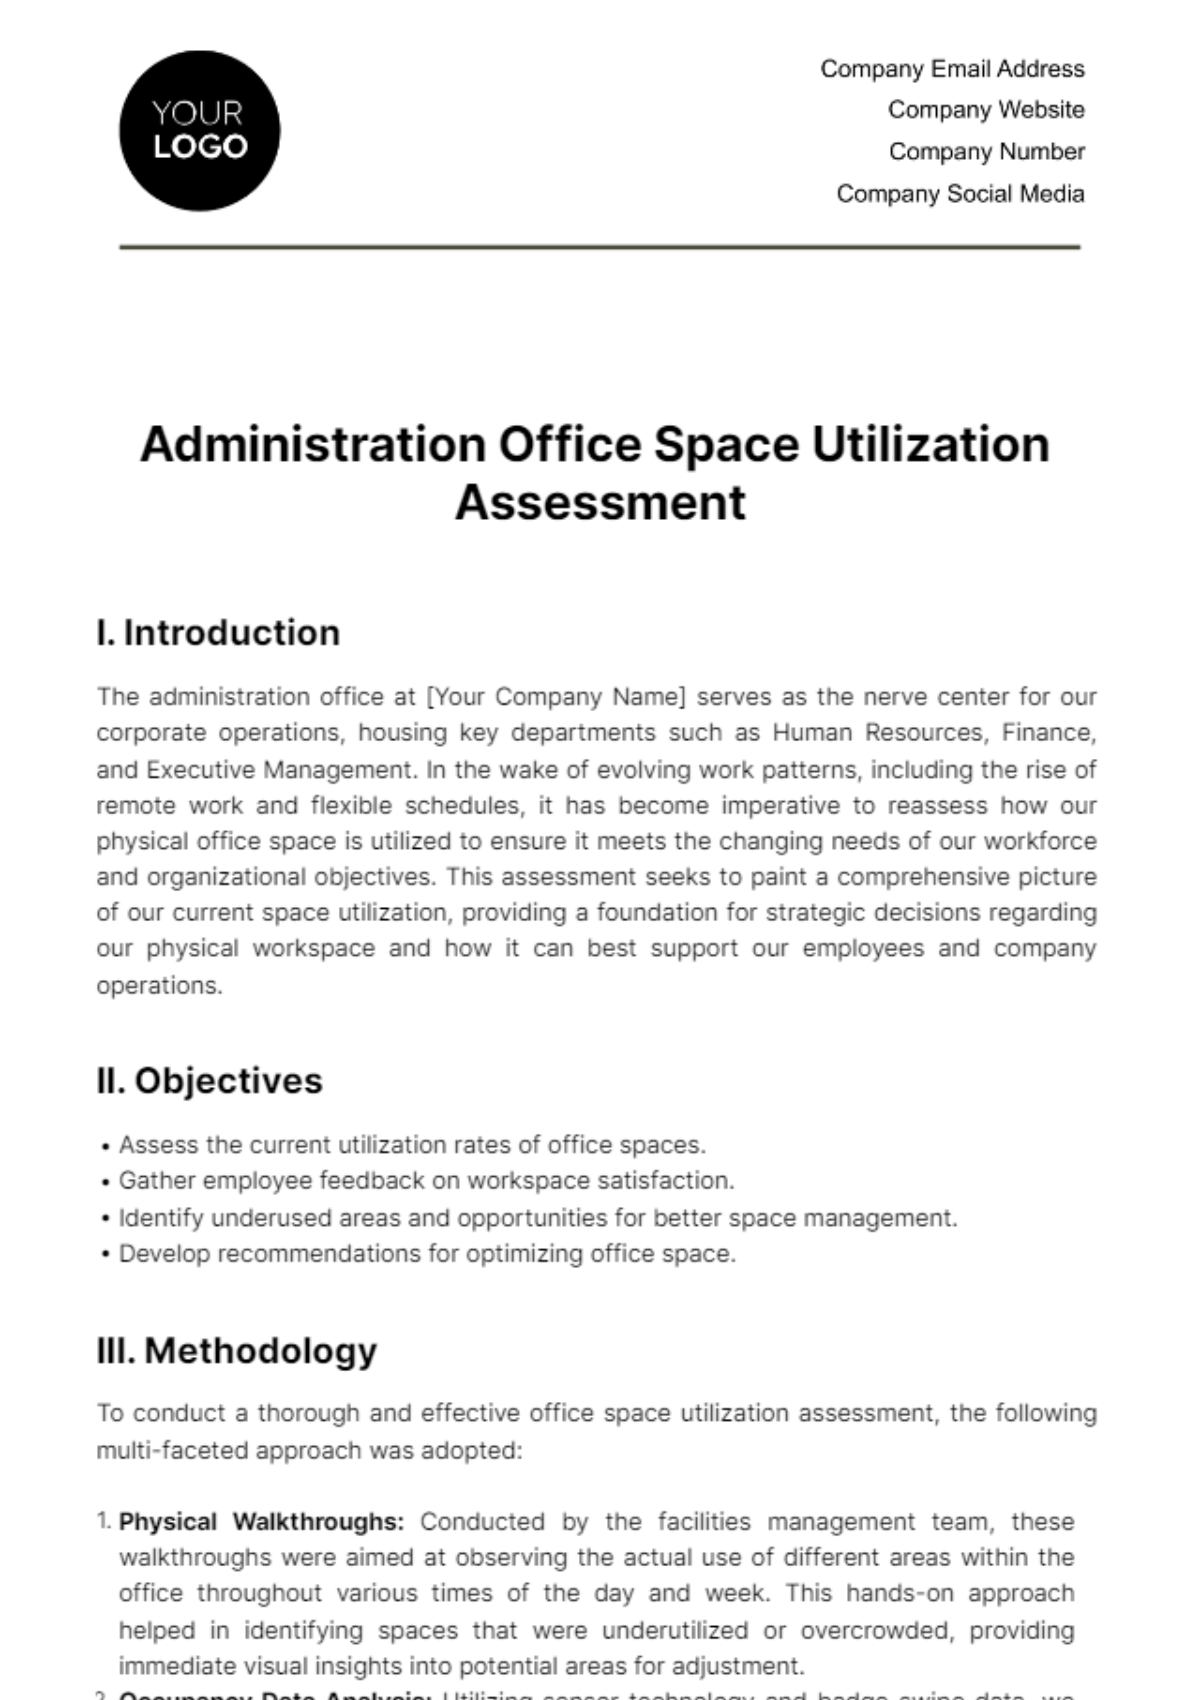 Administration Office Space Utilization Assessment Template